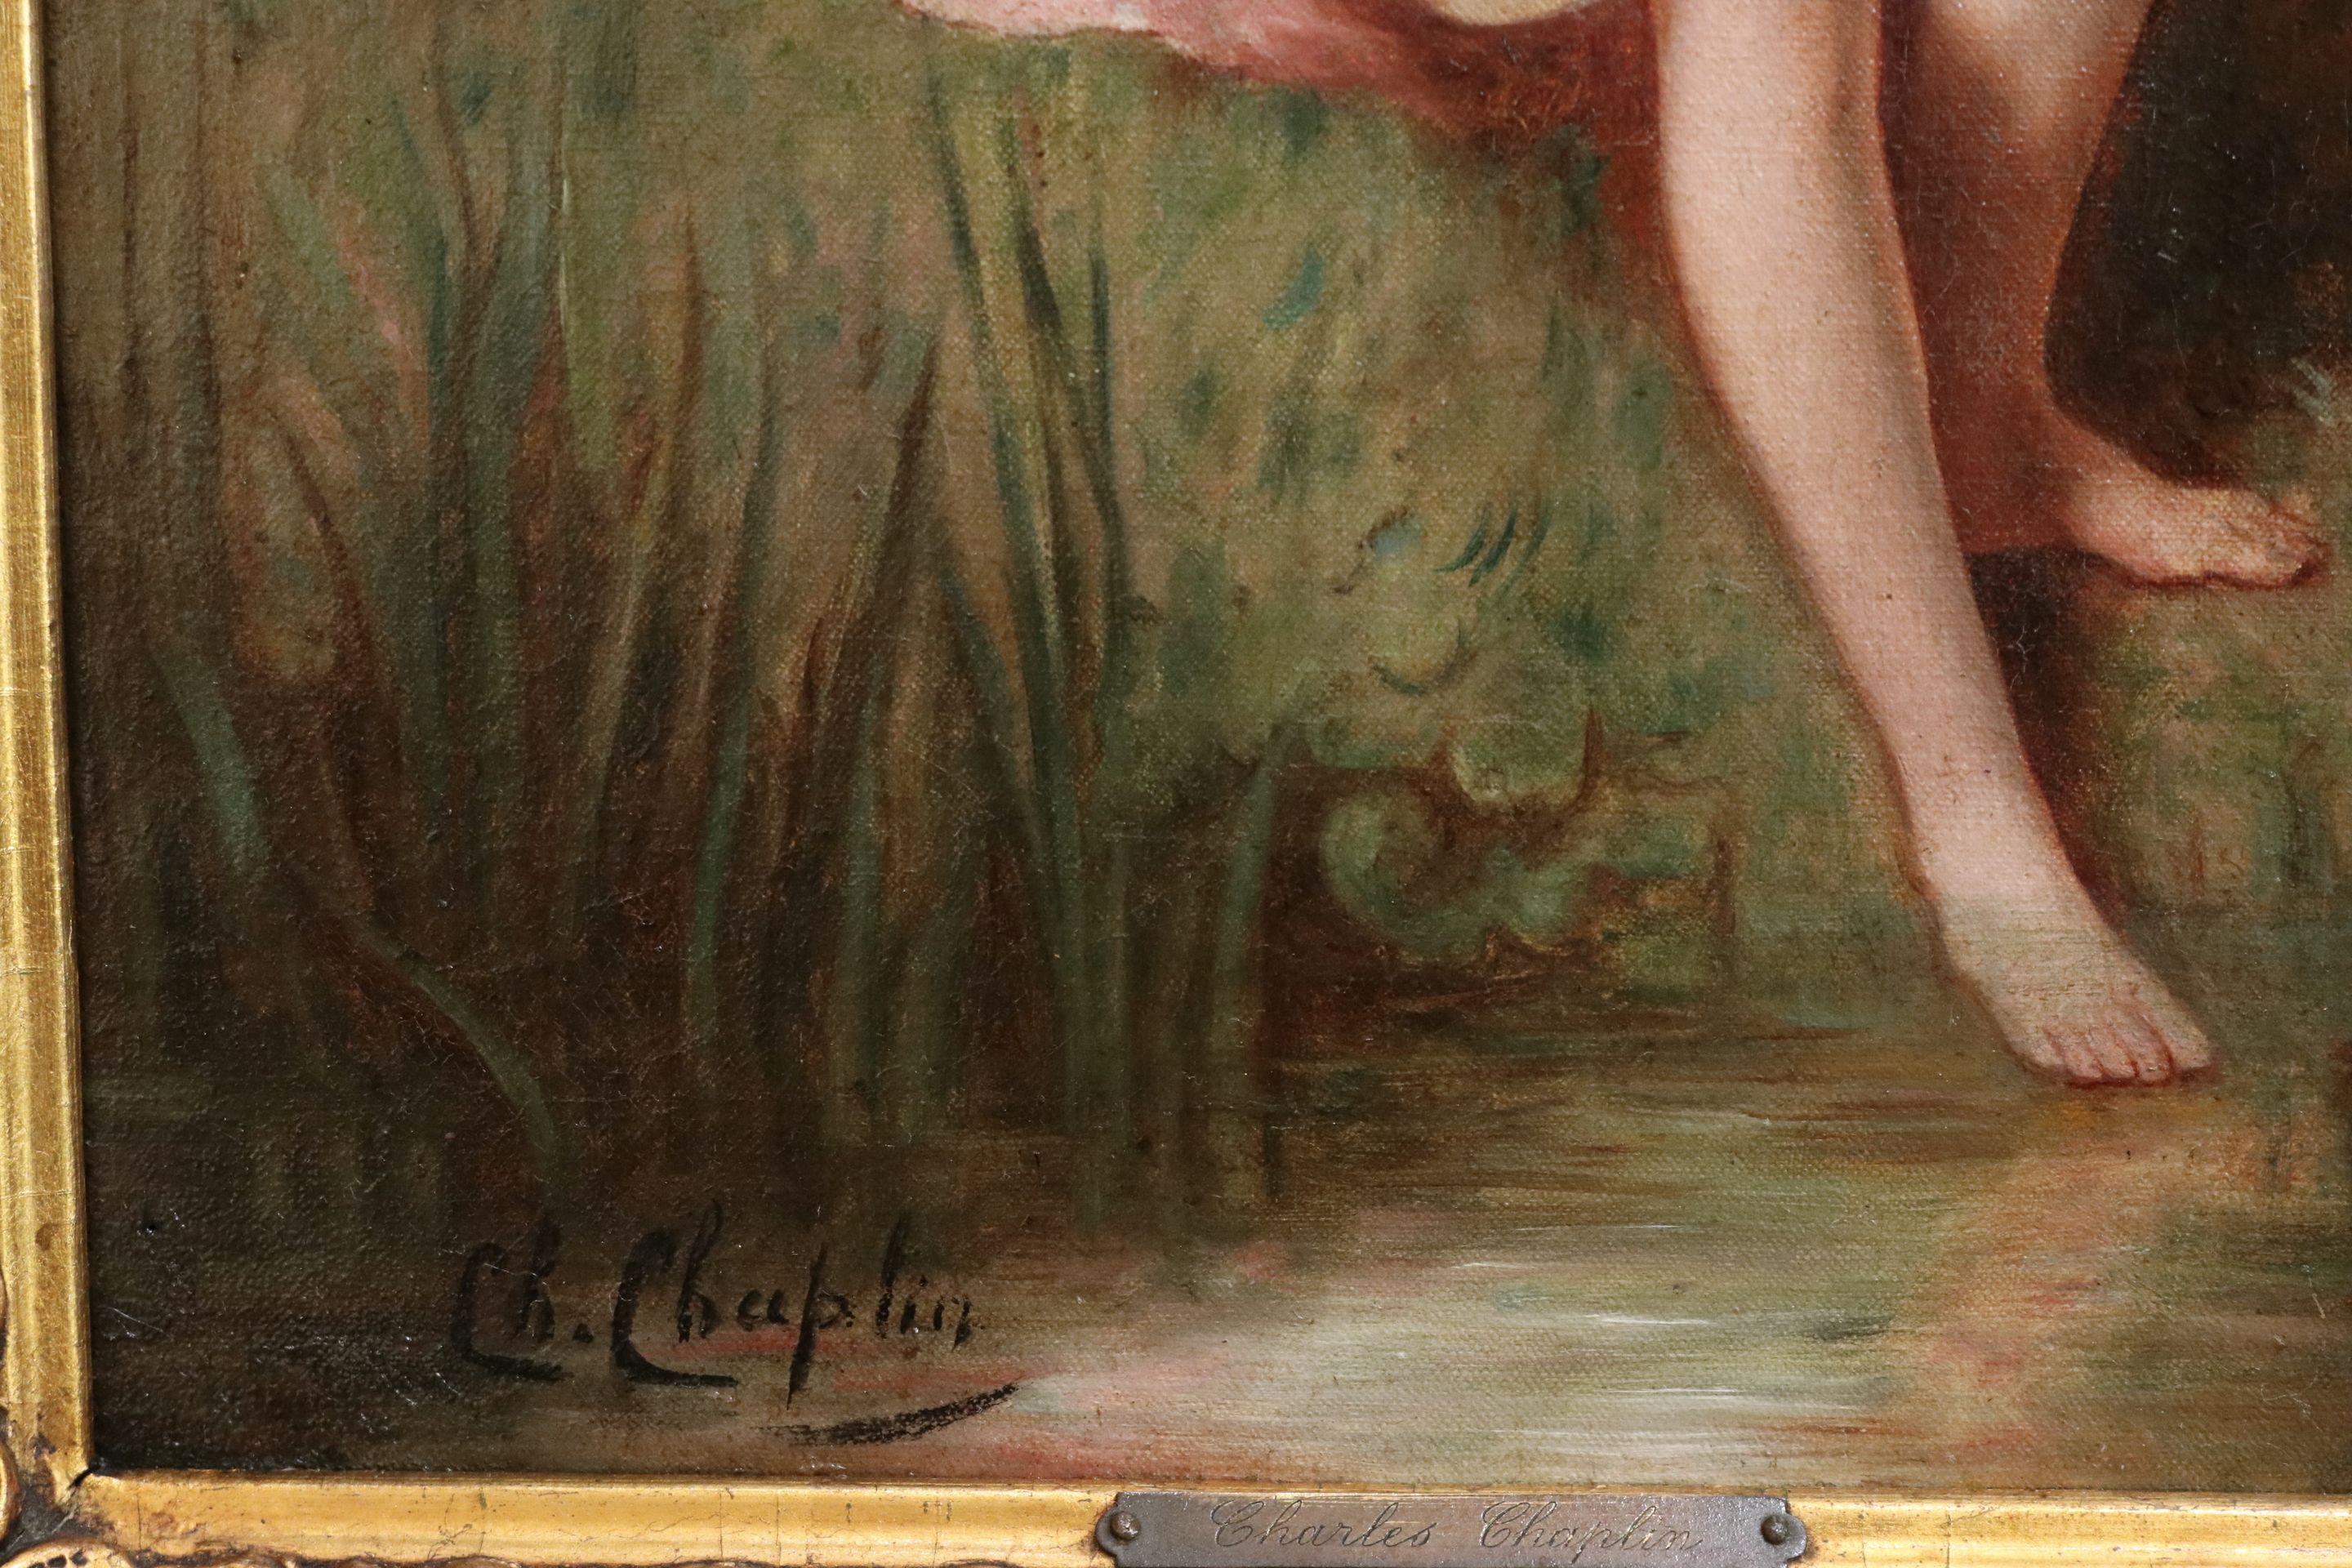 Baigneuse - 19th Century Oil, Nude Figure in River Landscape by Charles Chaplin 1